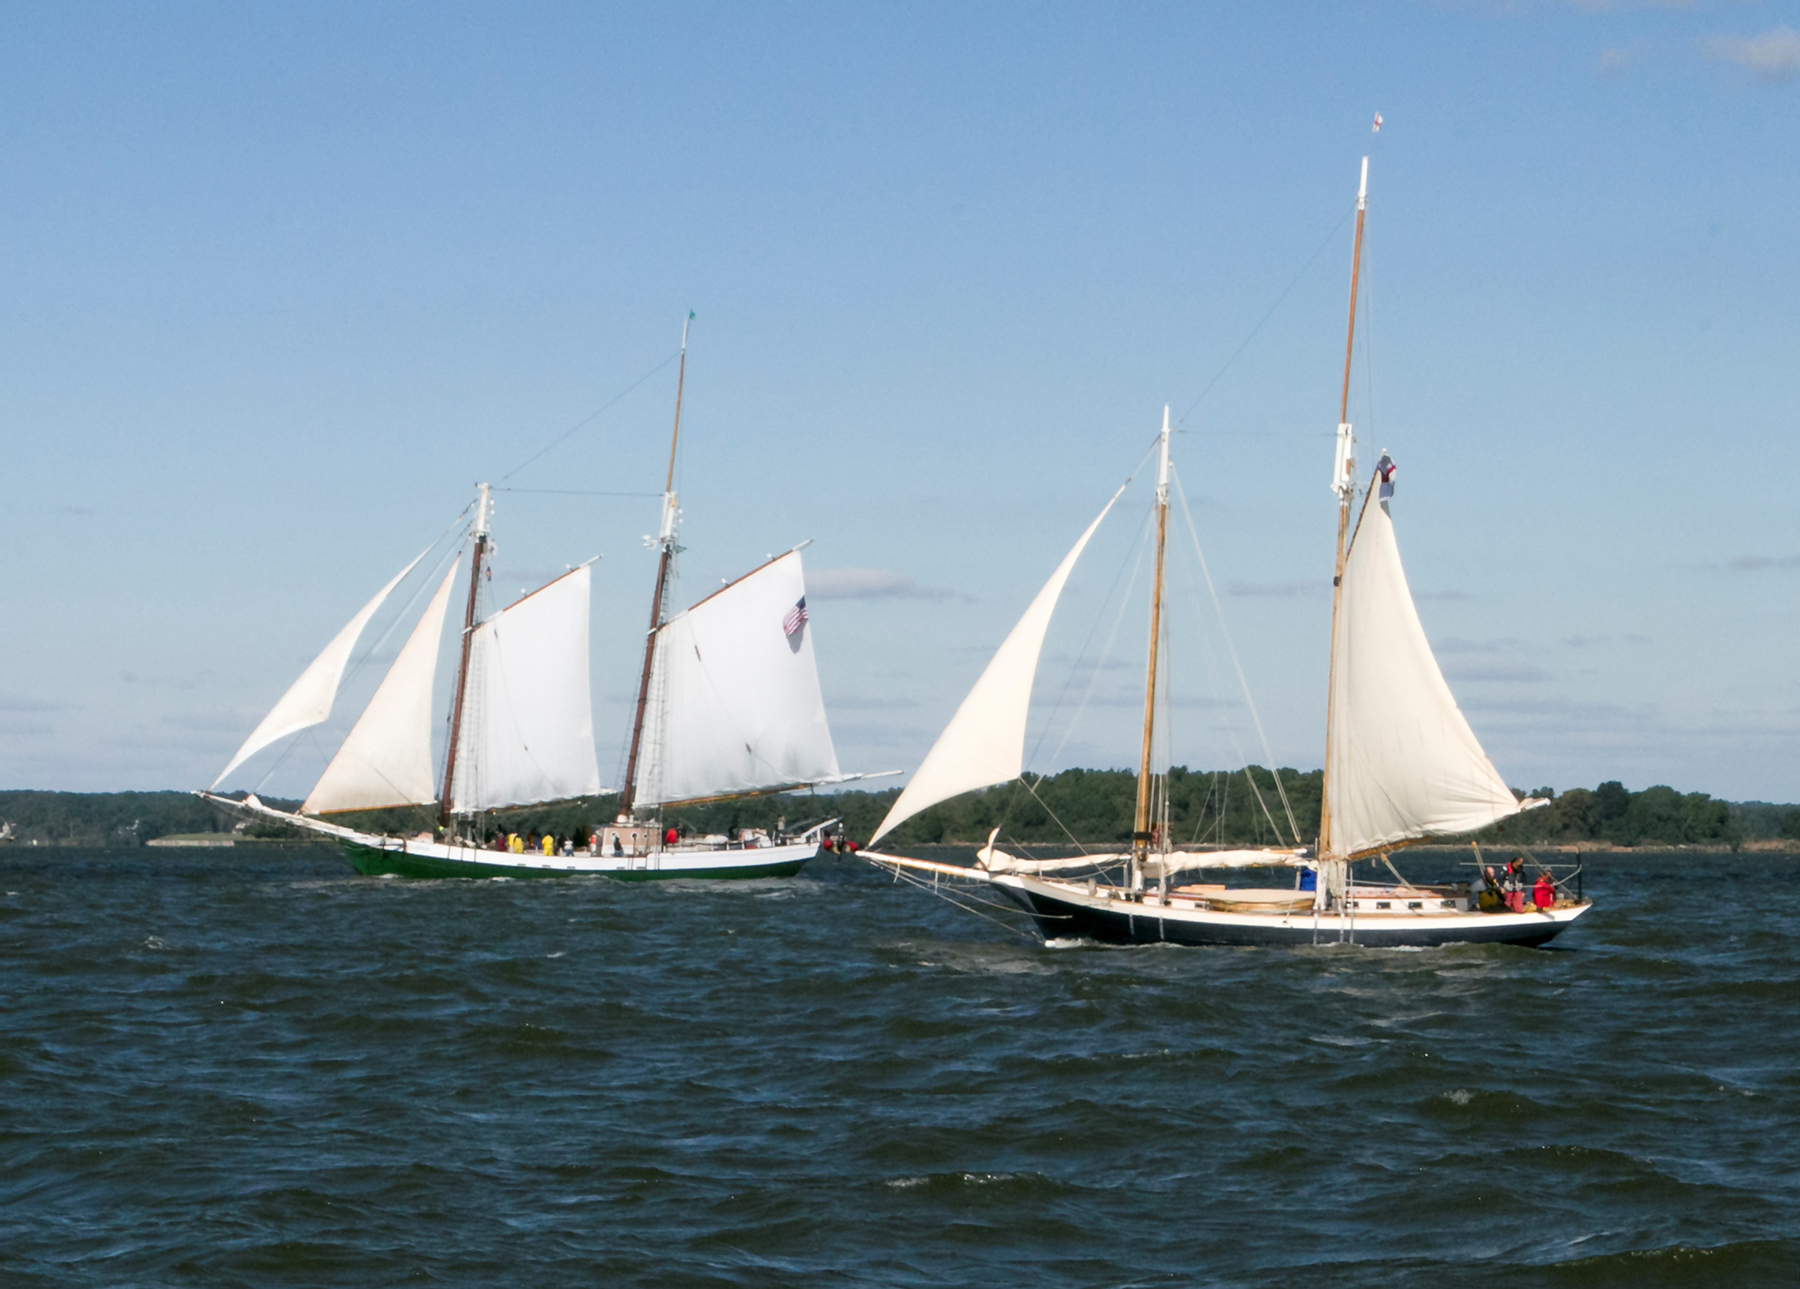 Two schooners sailing side by side on the Chesapeake Bay